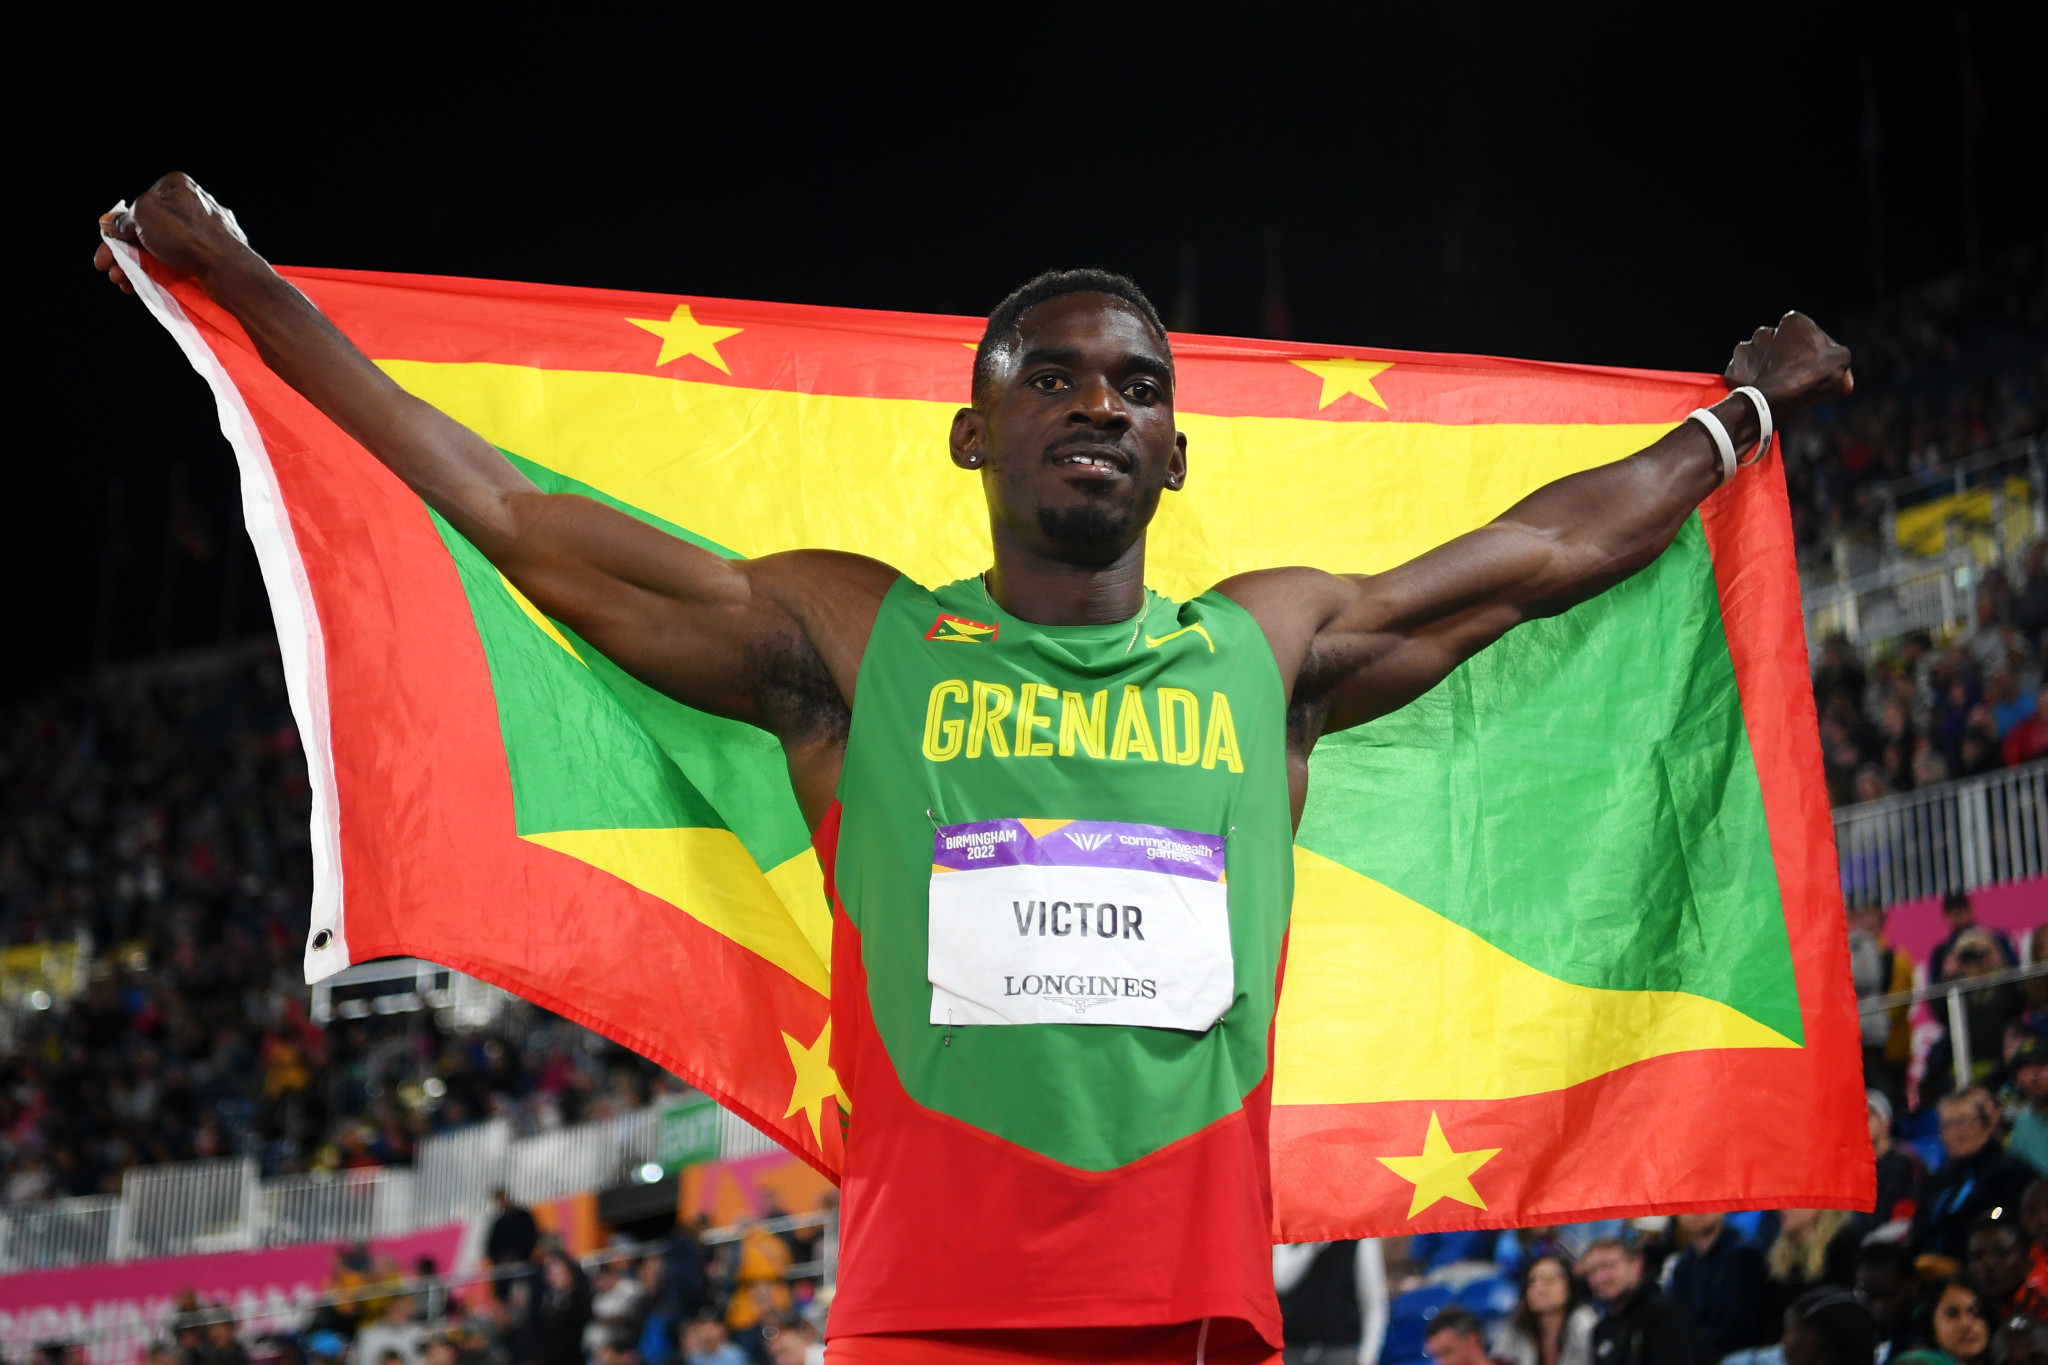 Lindon Victor of Grenada had enough to claim the win in the men's decathlon ©Getty Images